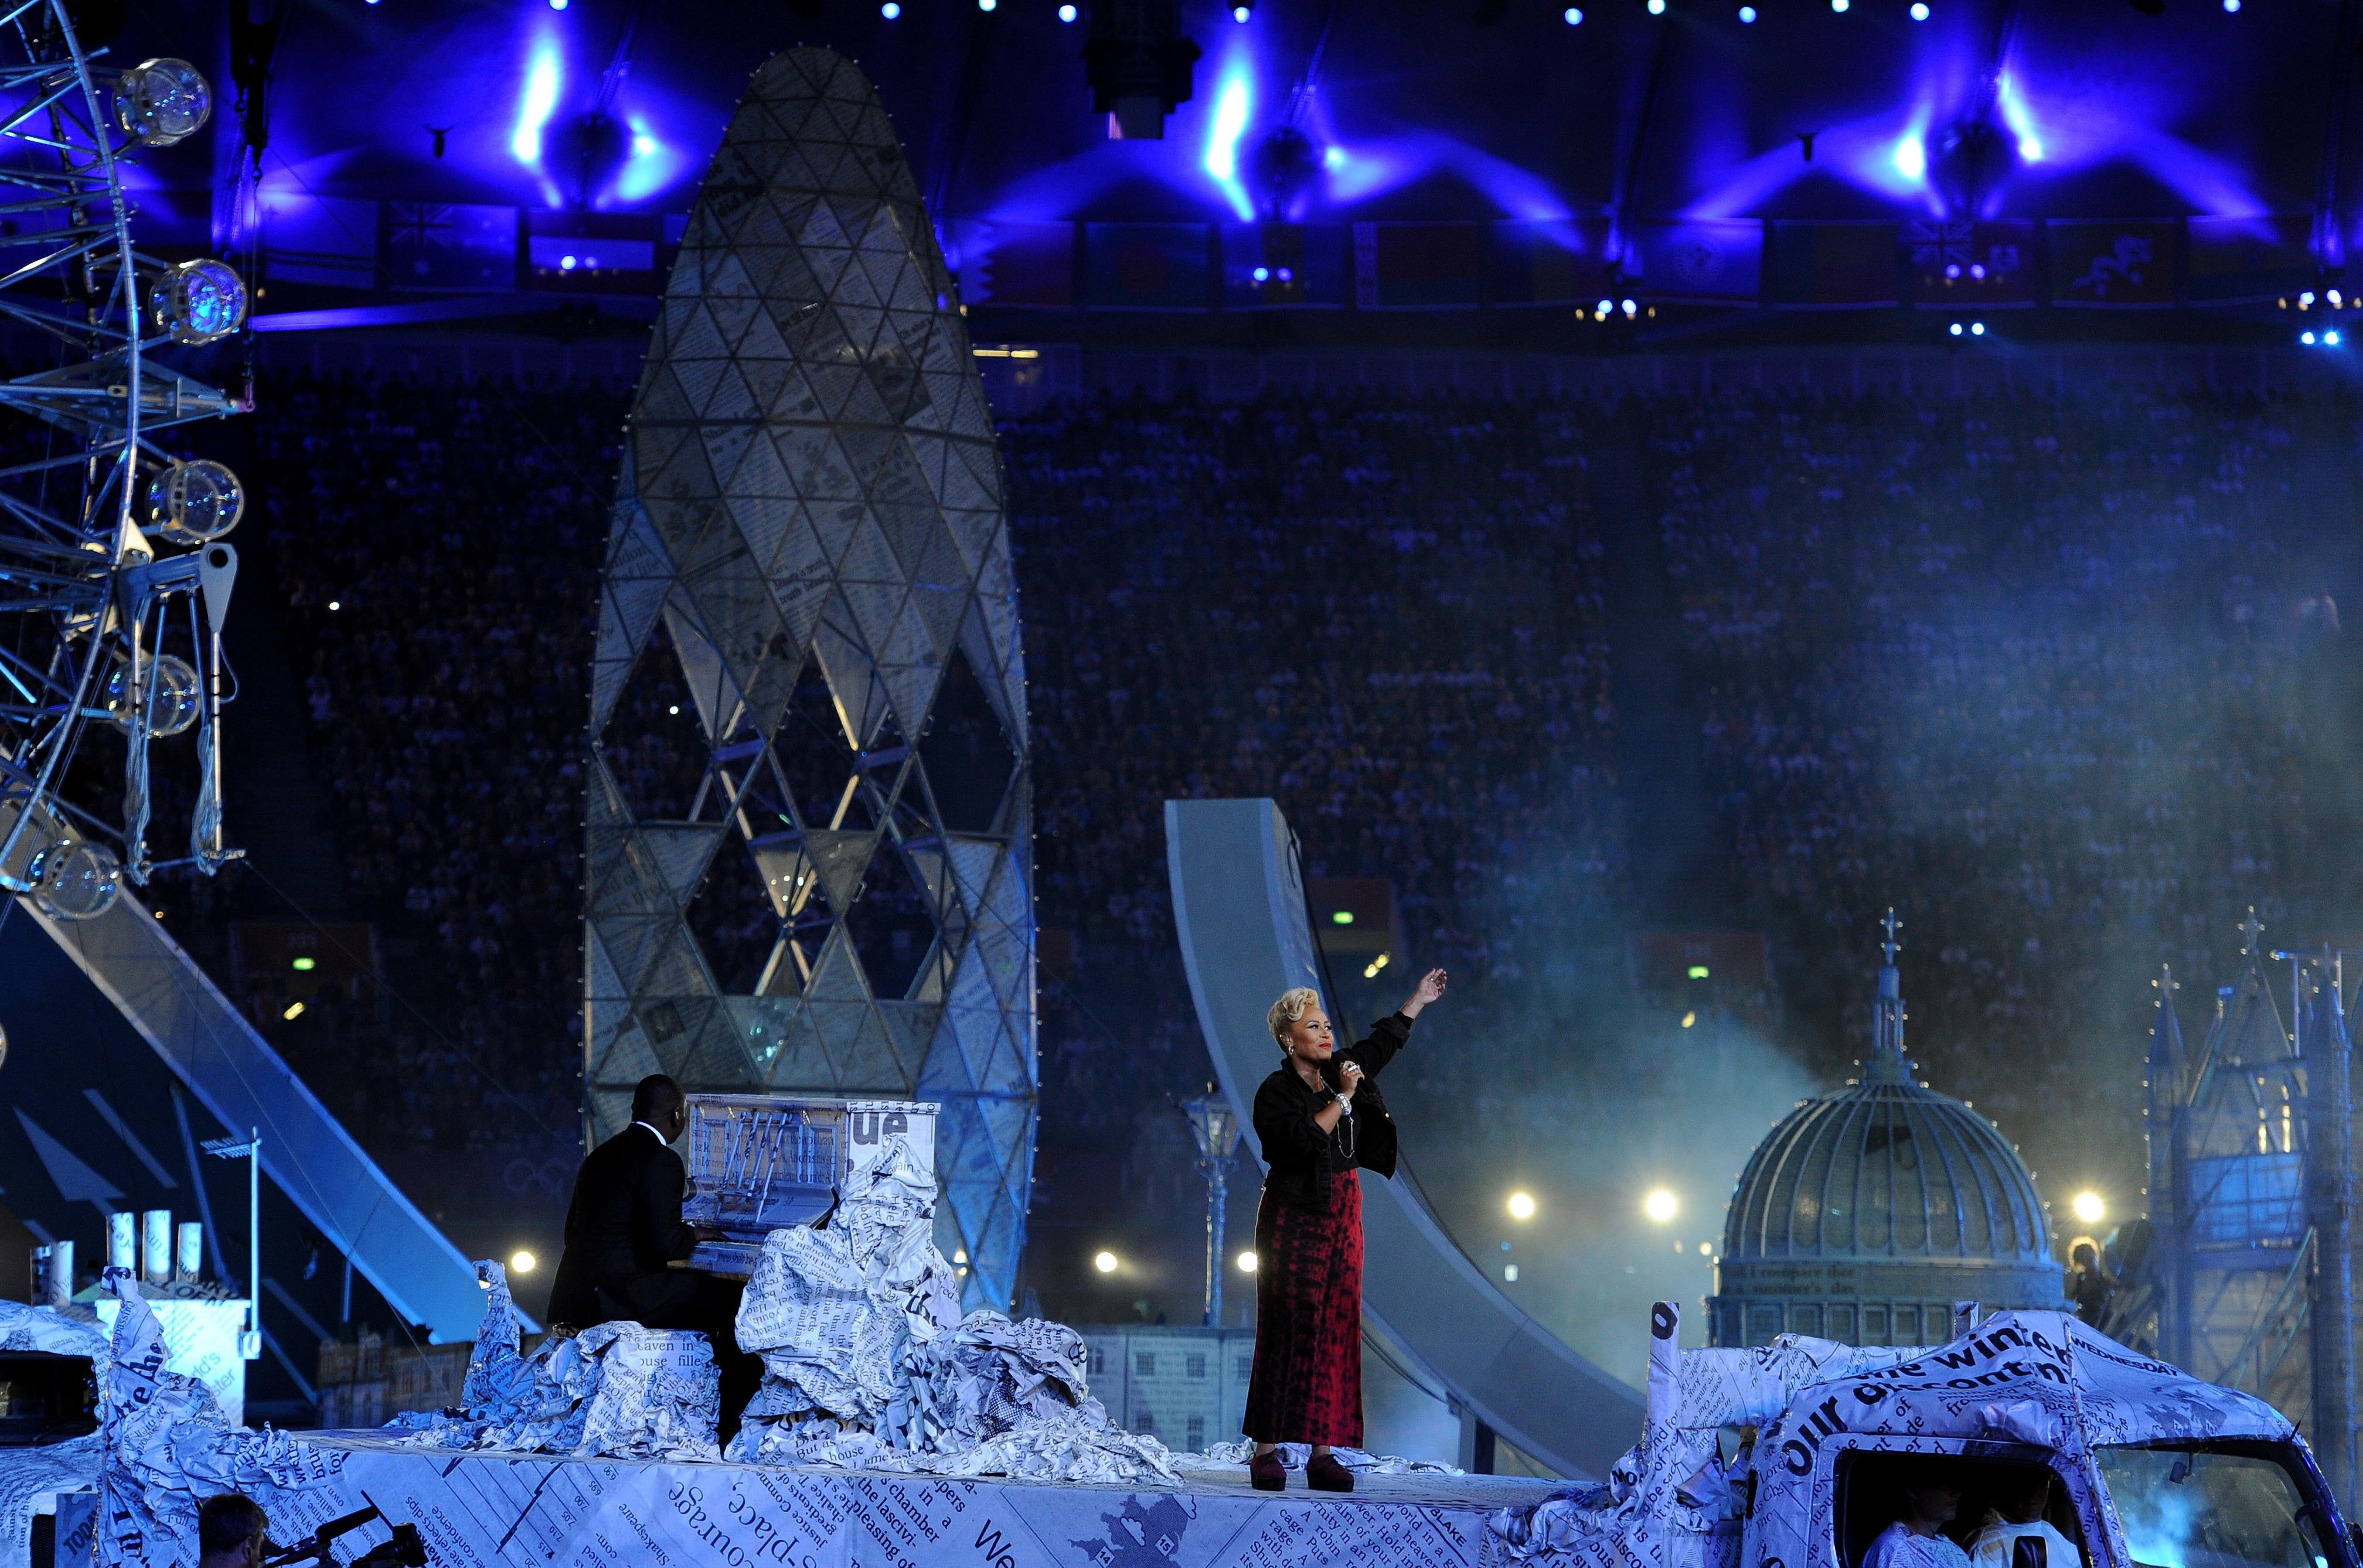 Emeli Sande performs during the Olympic Games closing ceremony in London (Owen Humphreys/PA)